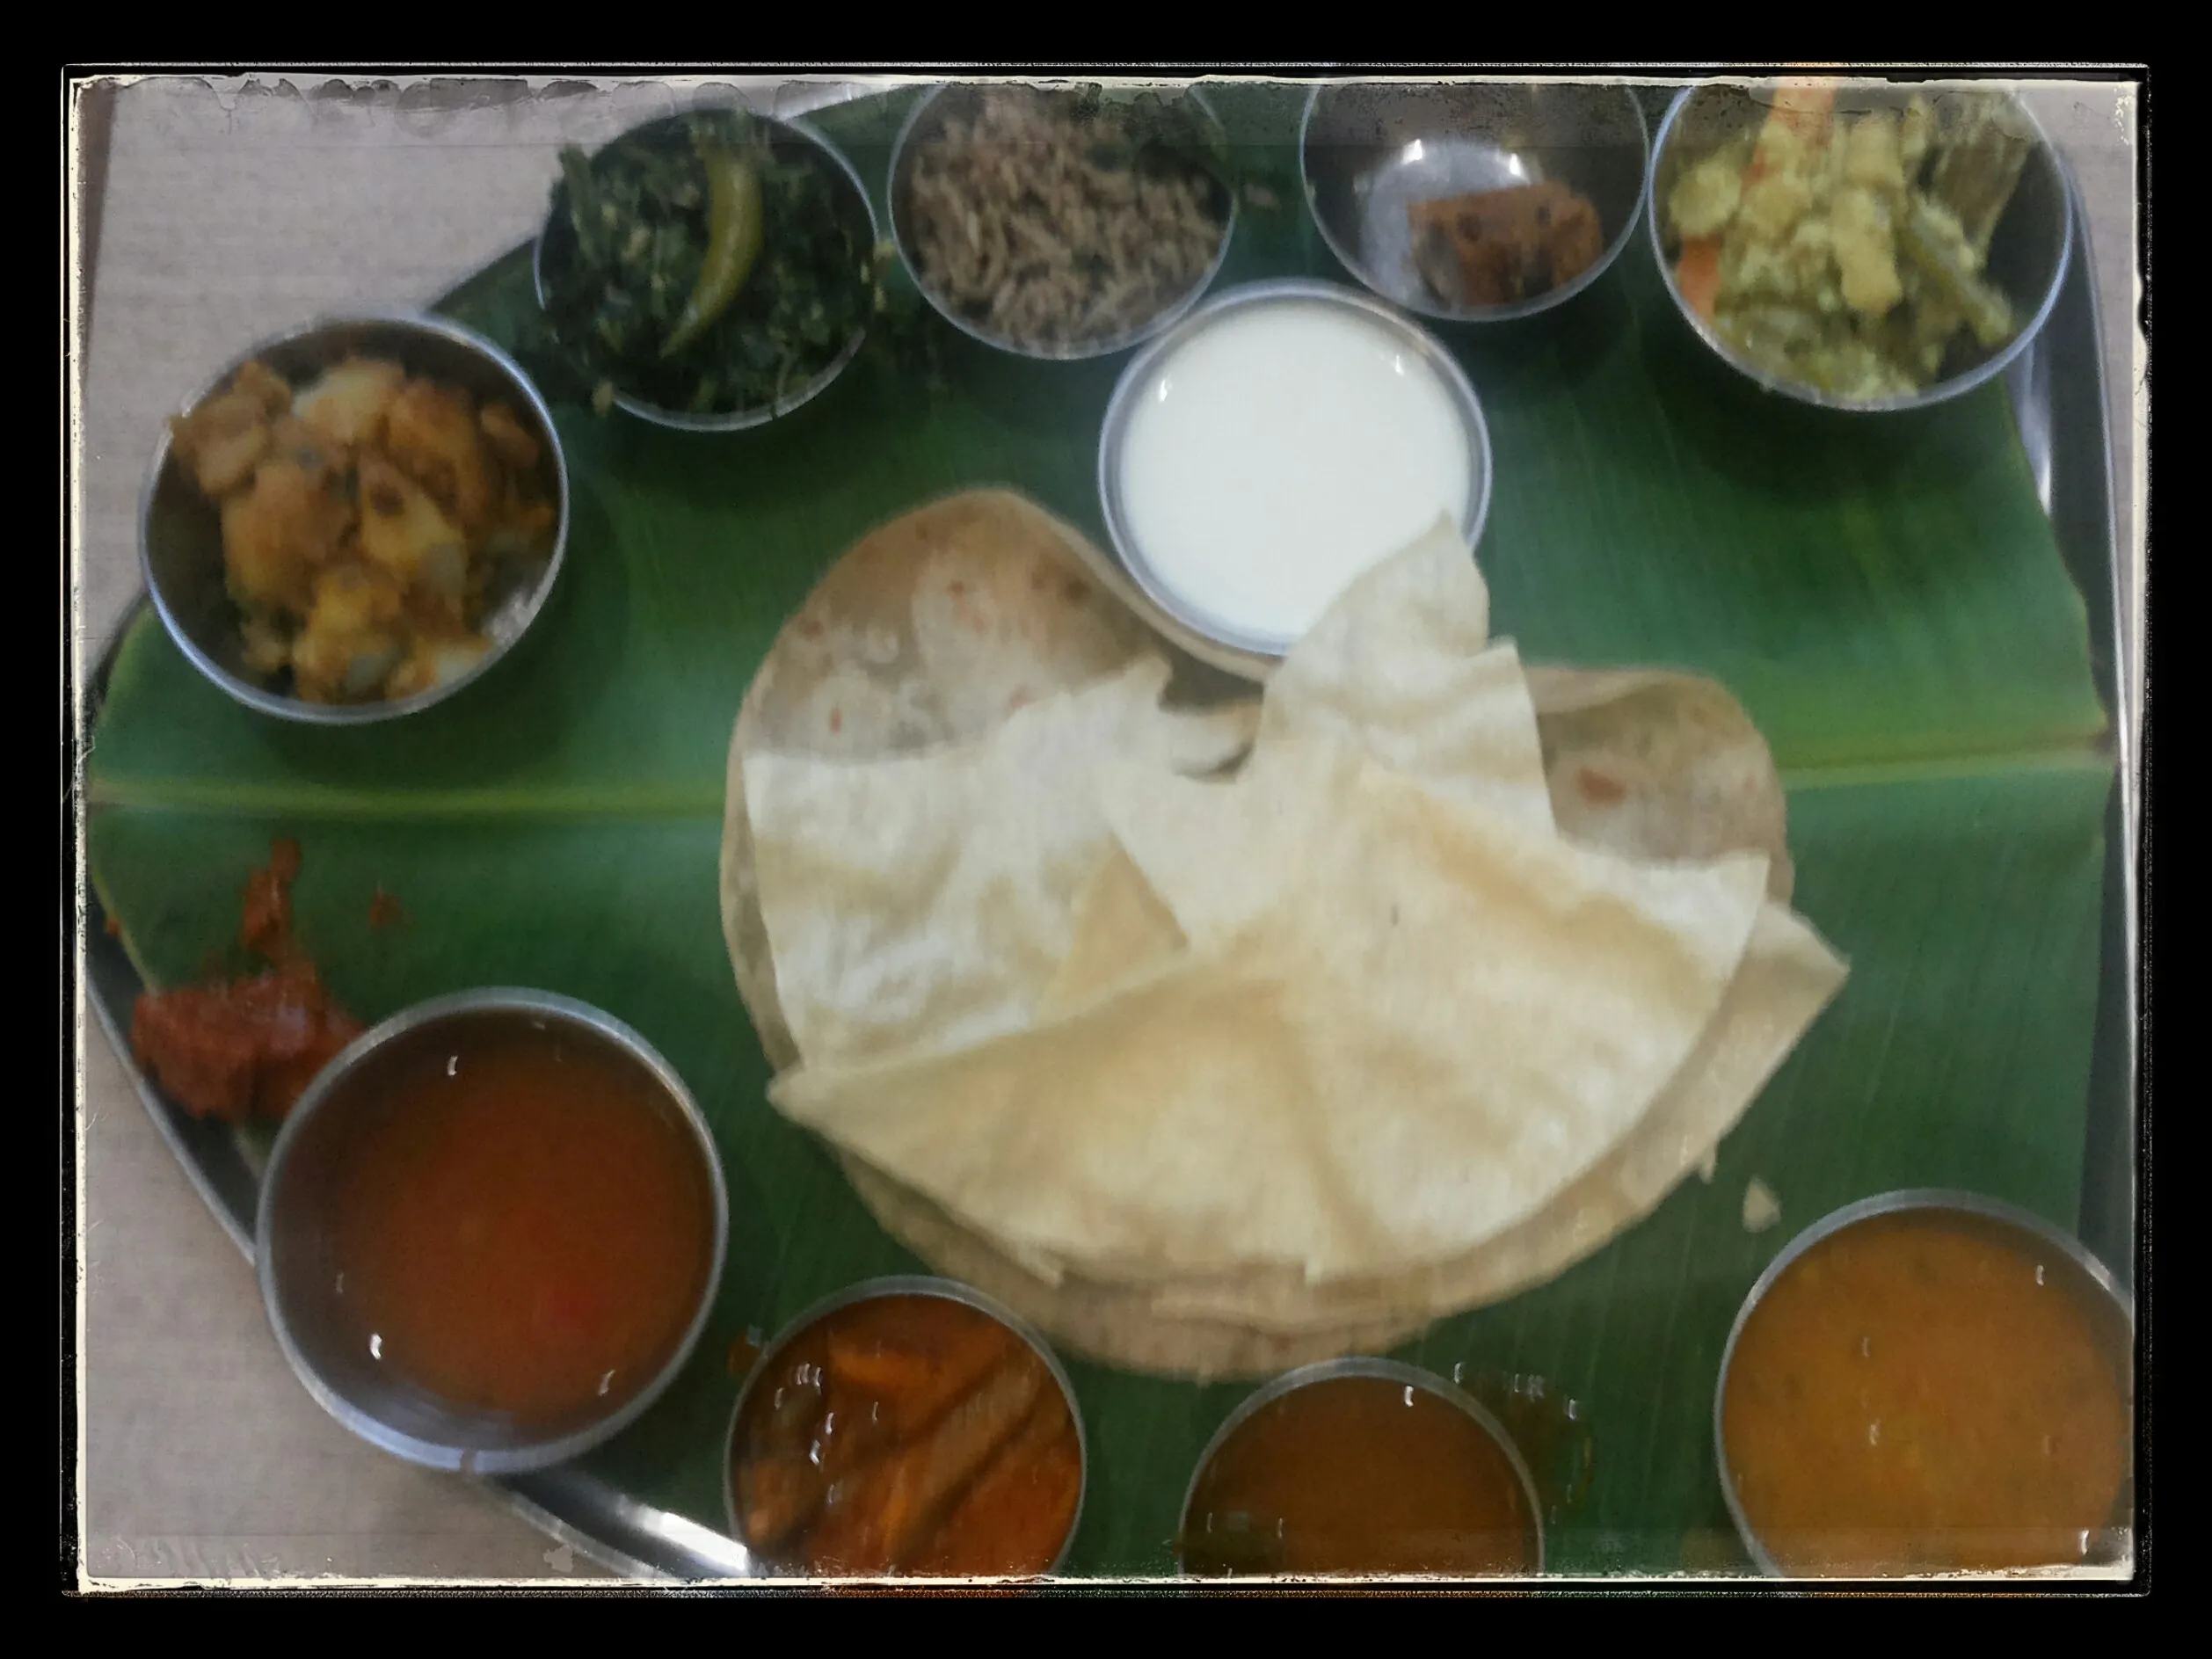 Saturday lunch ... a simple South Indian vegetarian thali